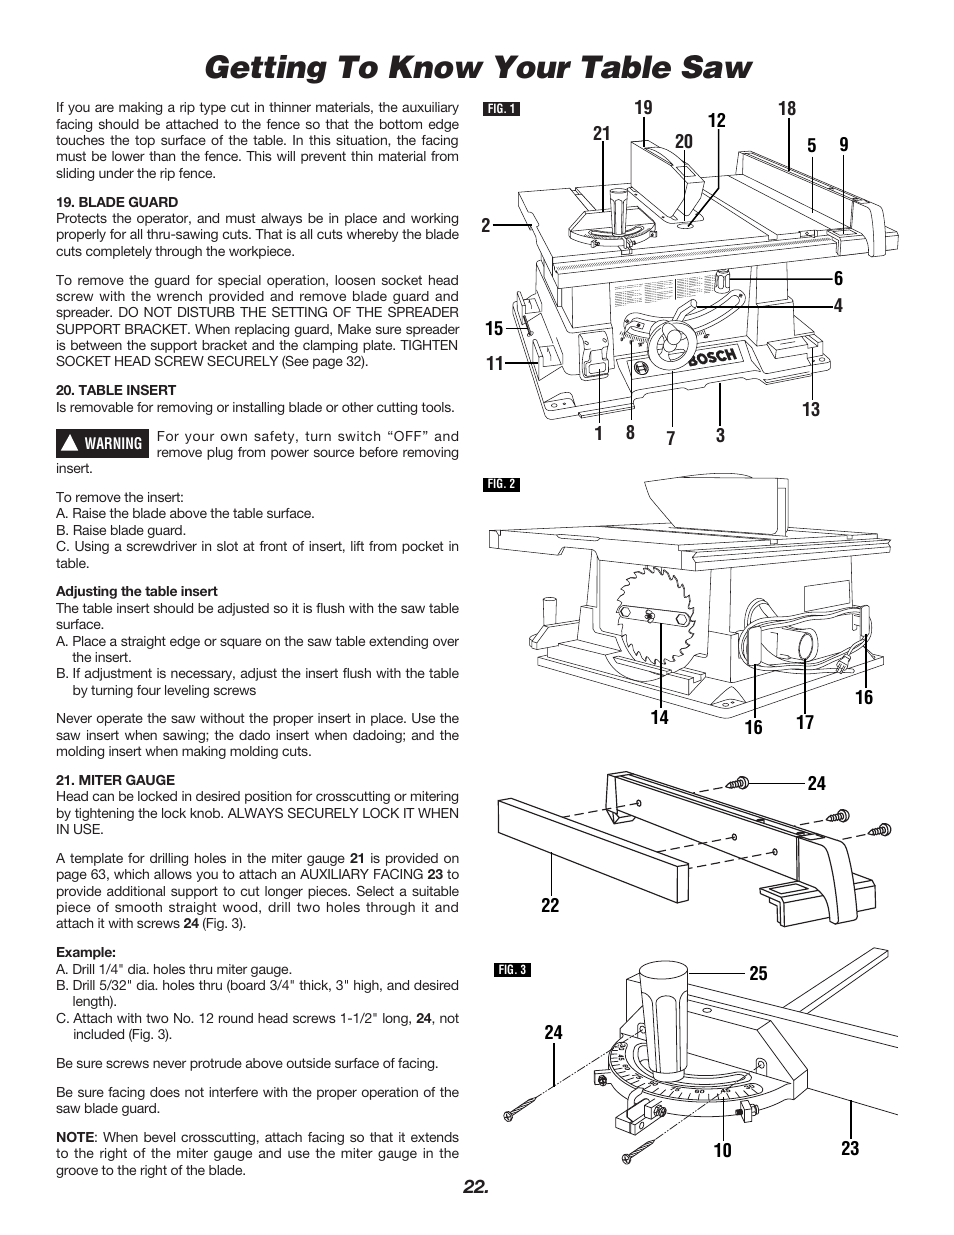 Getting To Know Your Table Saw Bosch 4000 User Manual Page 22 68